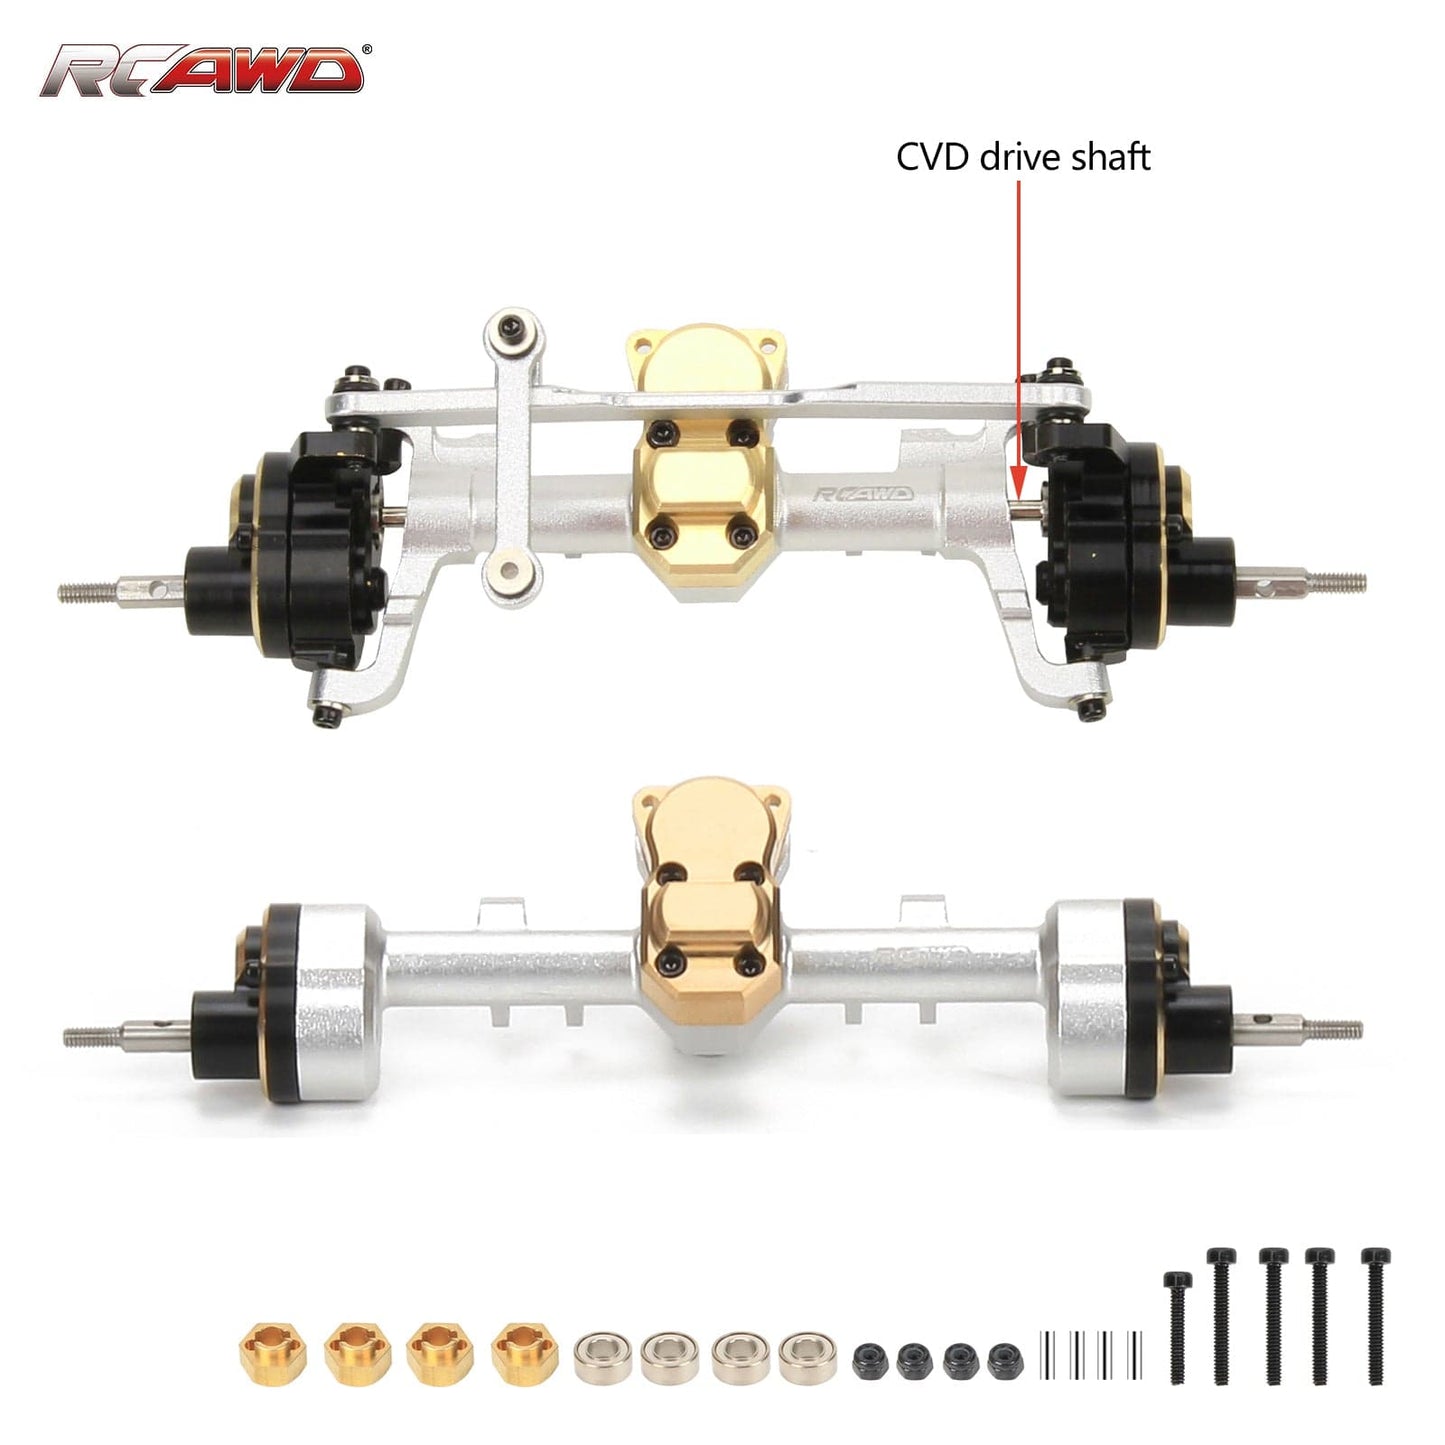 RCAWD SCX24 Portal Axles CVD edition Full Set Upgrade Parts - RCAWD